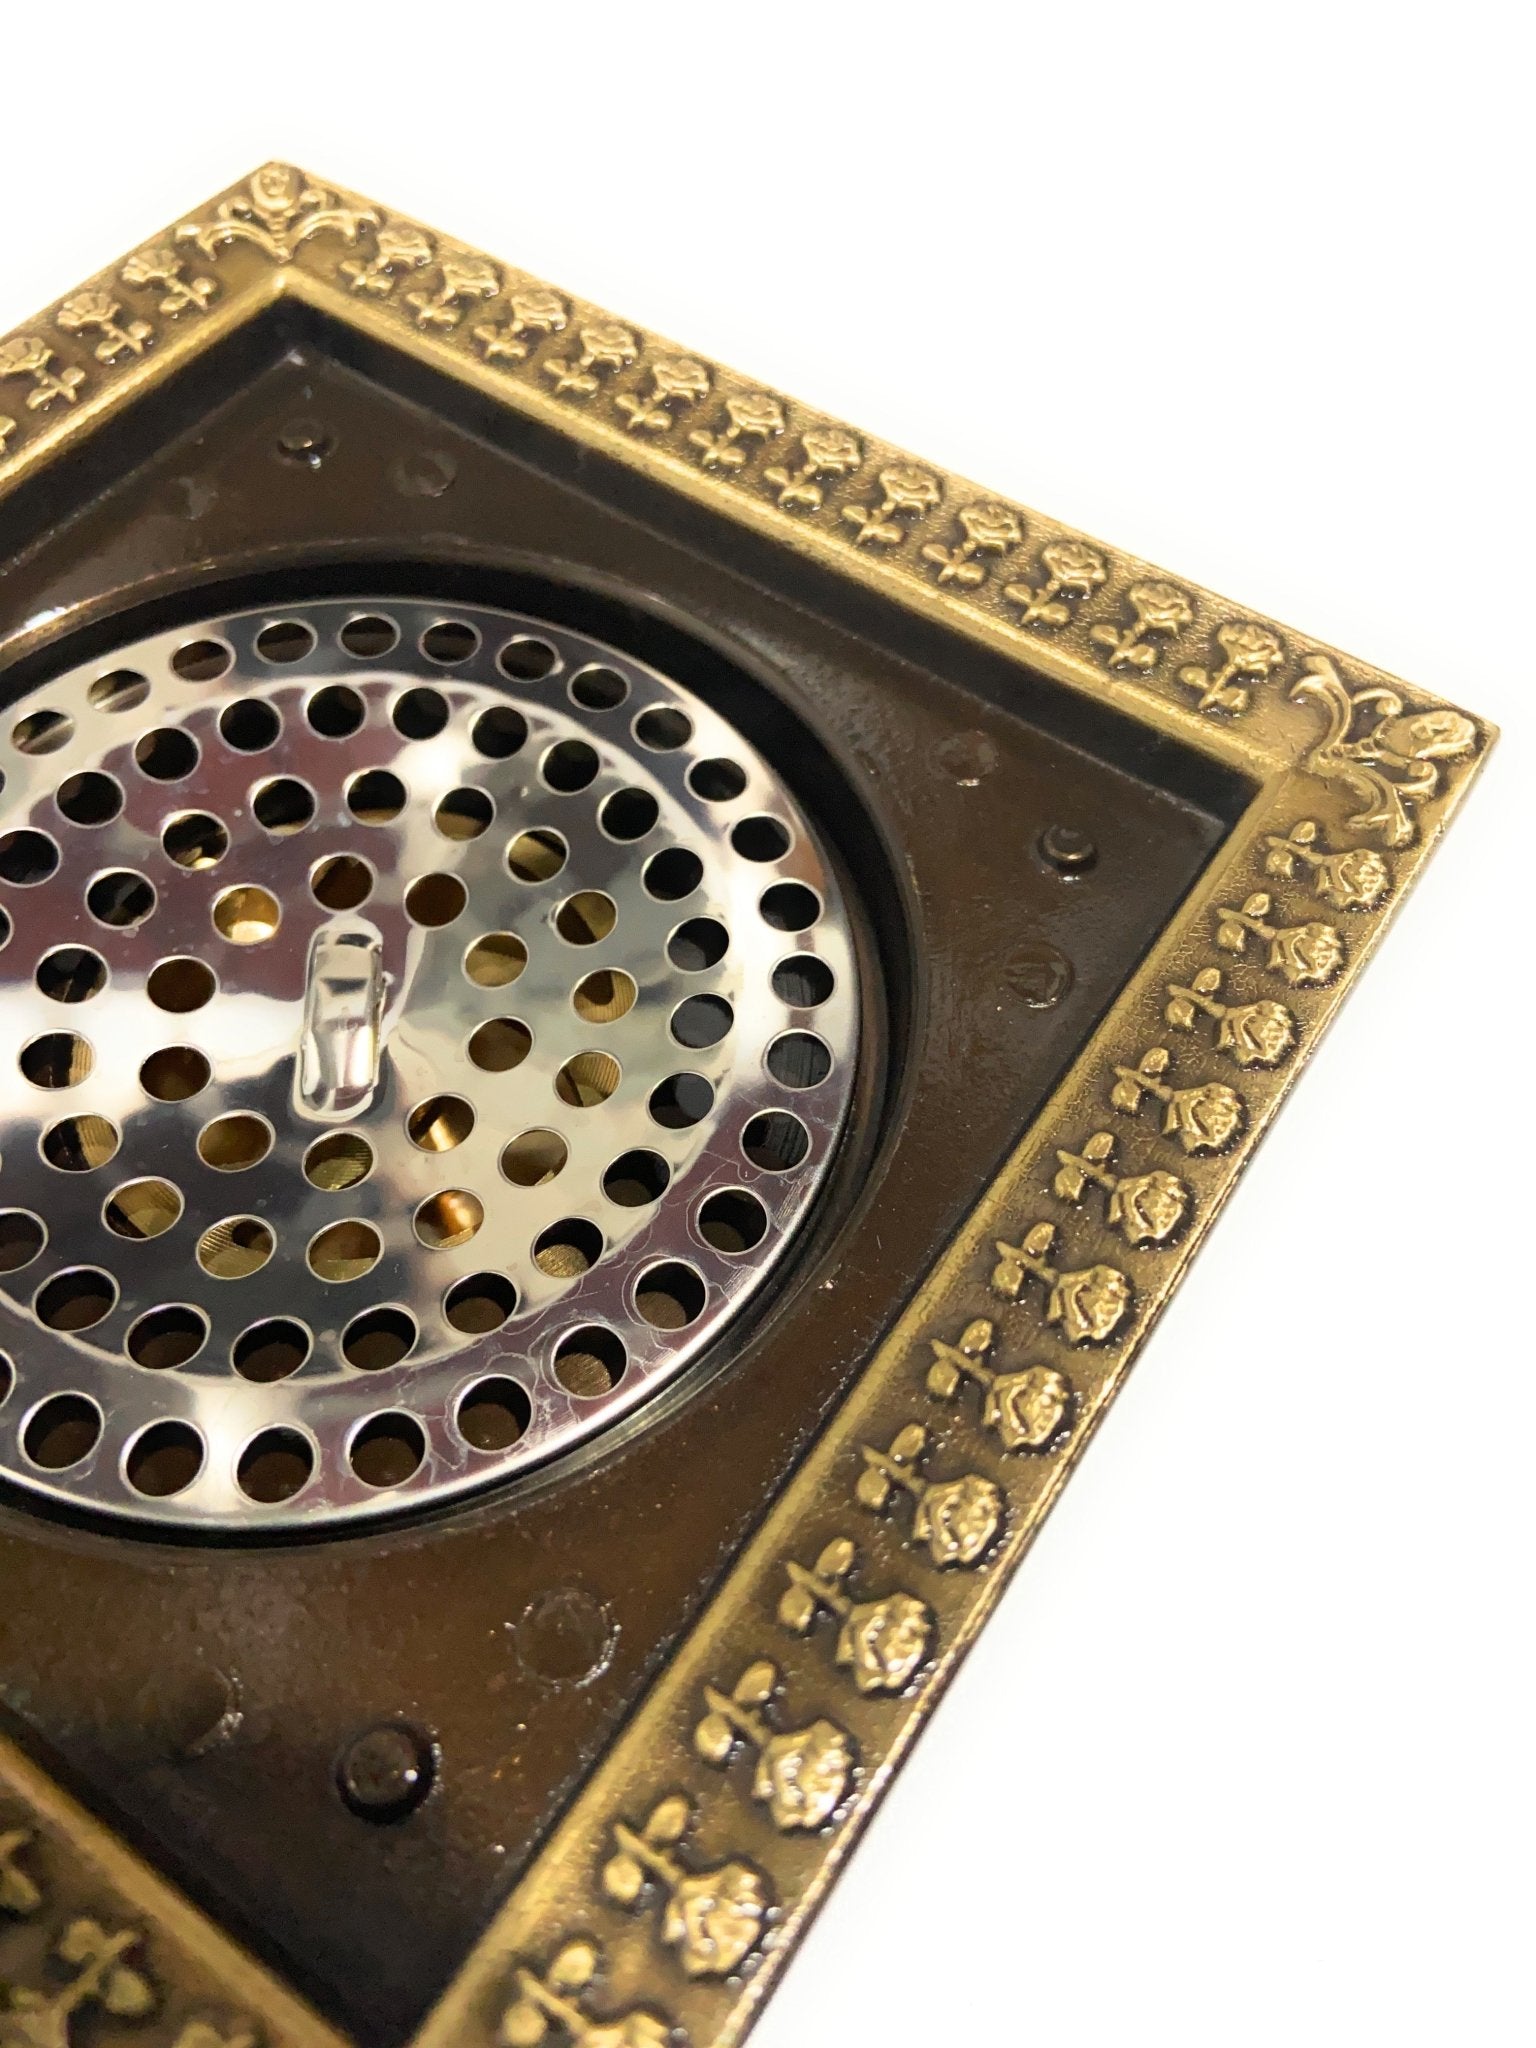 InArt Brass Square Shower Floor Drain with Removable Cover Grid Grate 5 inch Long Antique Finish Floral Pattern - InArt-Studio-USA